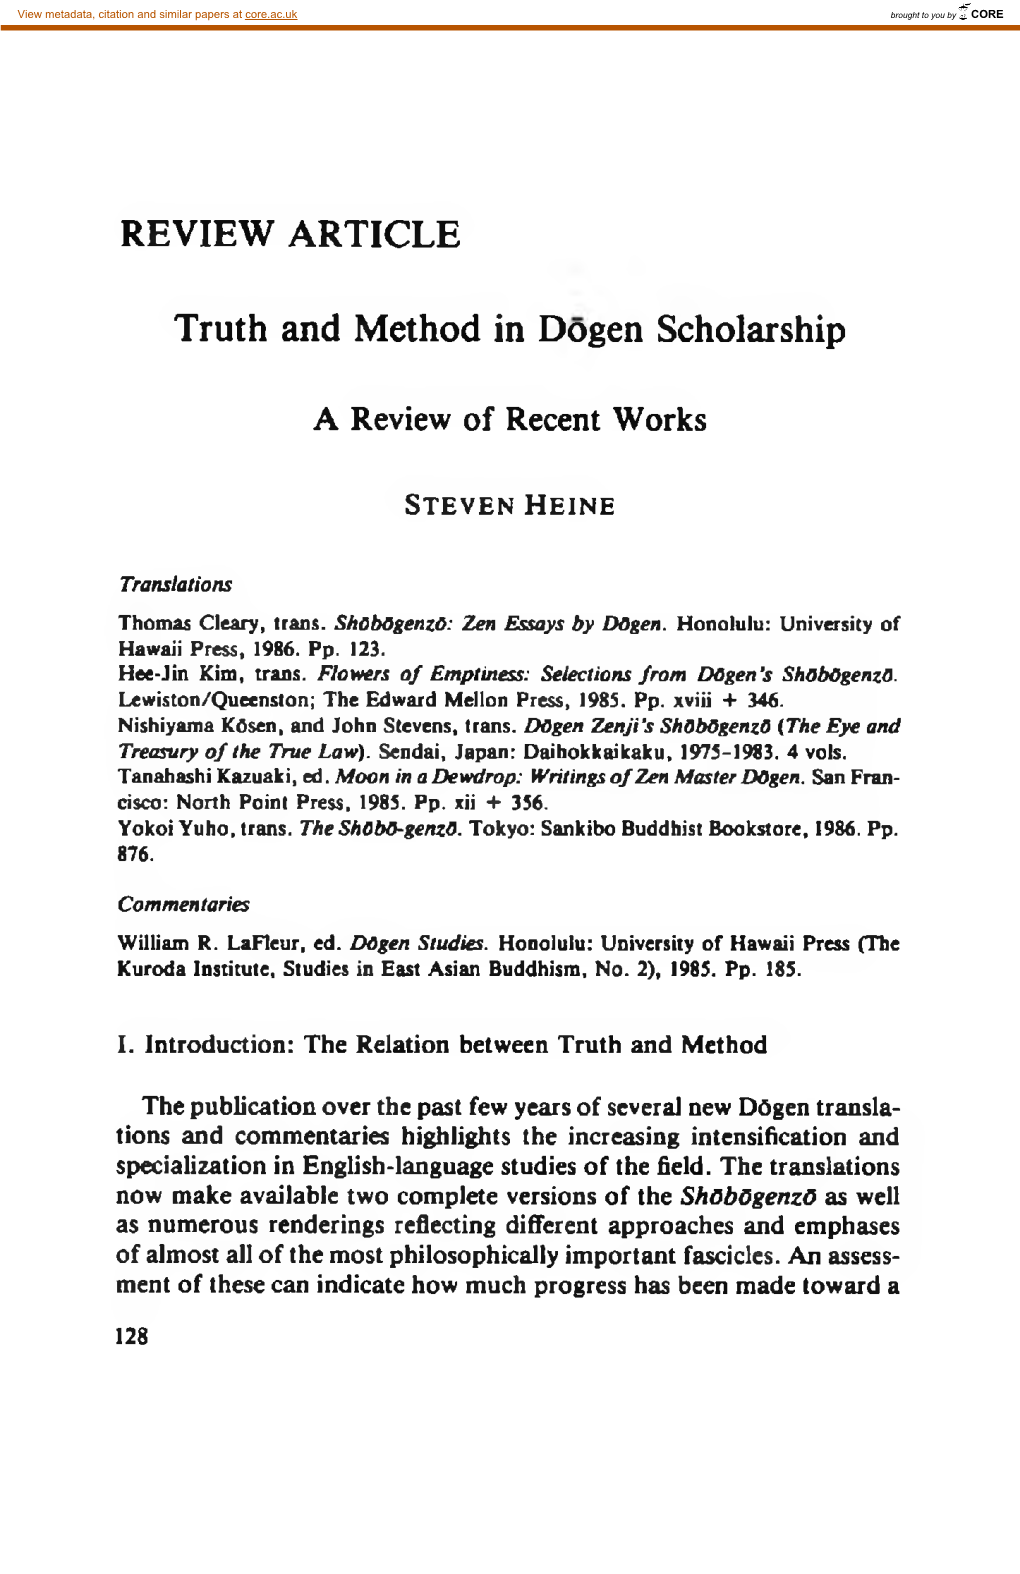 REVIEW ARTICLE Truth and Method in Dogen Scholarship